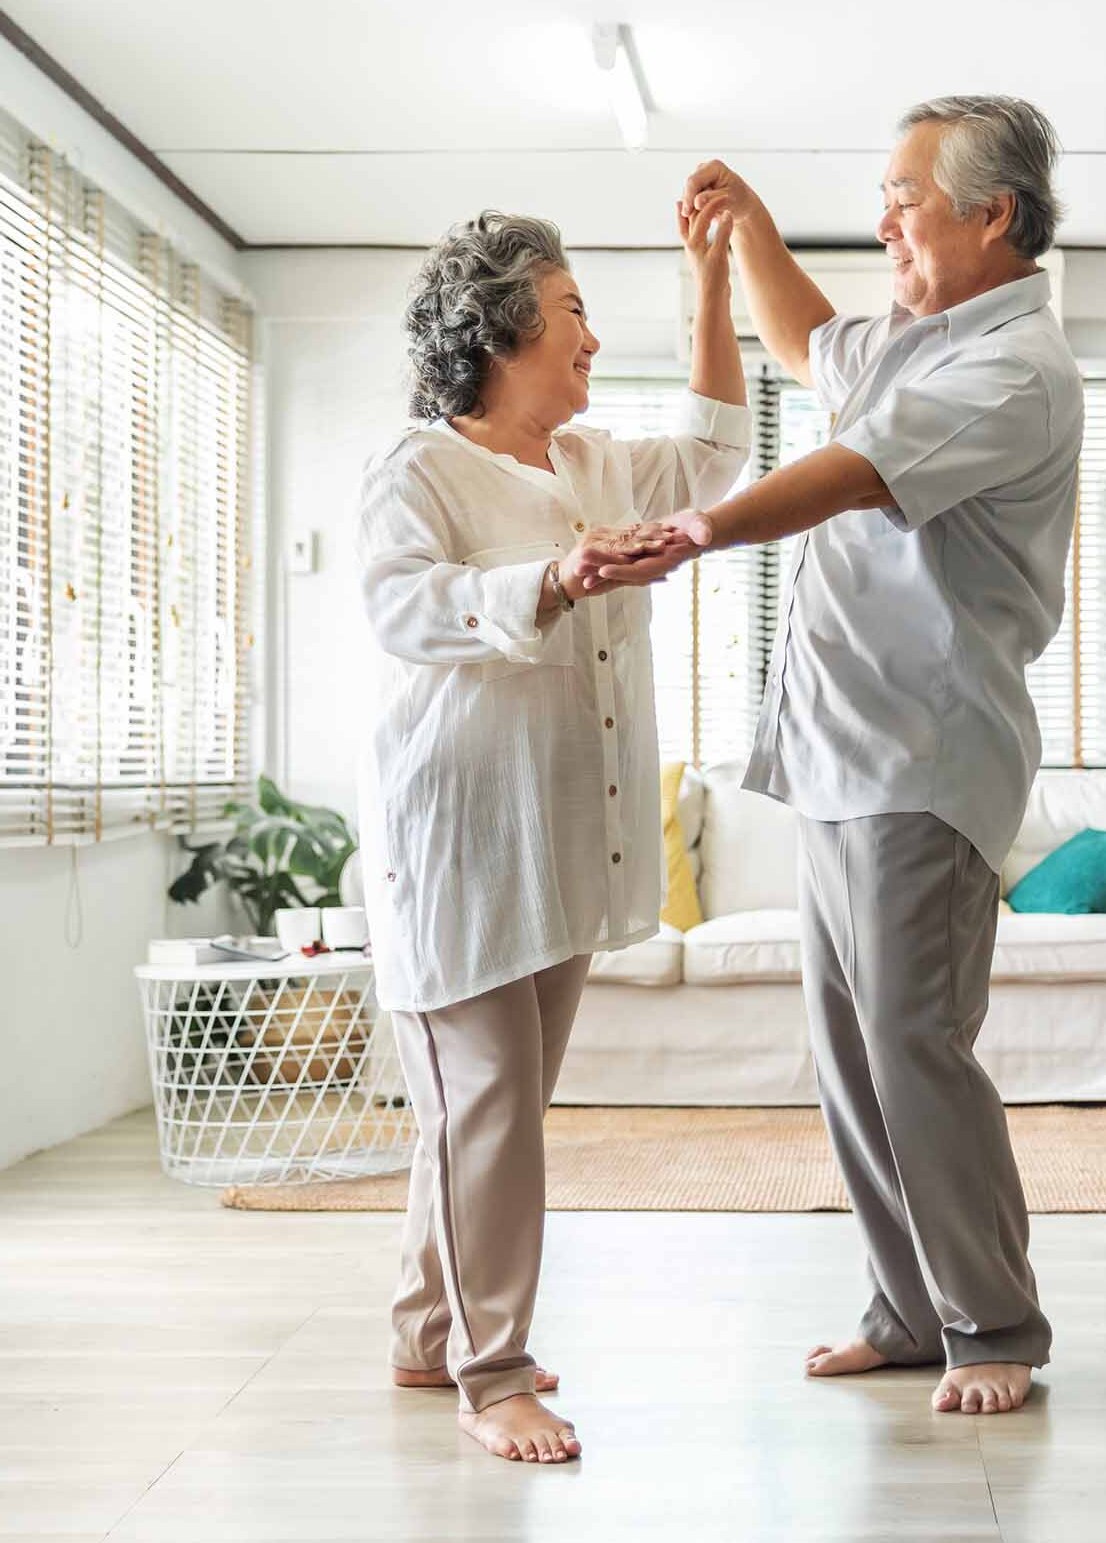 Romantic Asian Senior couple dancing at home. Happy Smiling Grandfather and Grandmother having fun Celebrating in wedding Anniversary day. Elderly man and woman holding hands together, Romance, lover